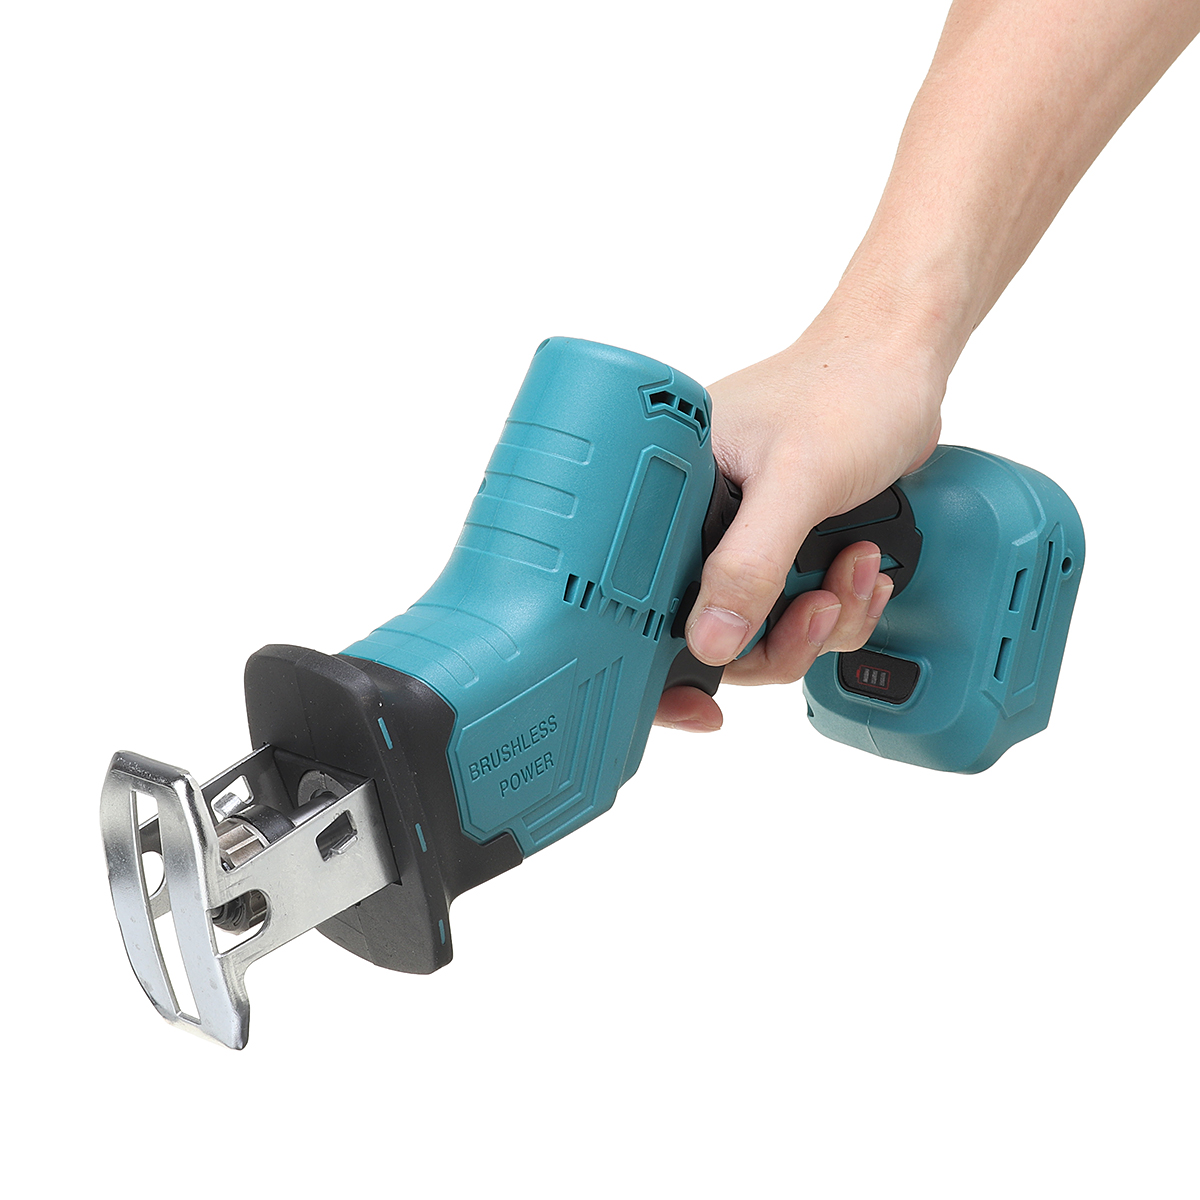 Rechargeable-Reciprocating-Saw-Brushless-Electric-Saw-For-Makita-Battery-Woodworking-Wood-Plastic-Ir-1886209-3